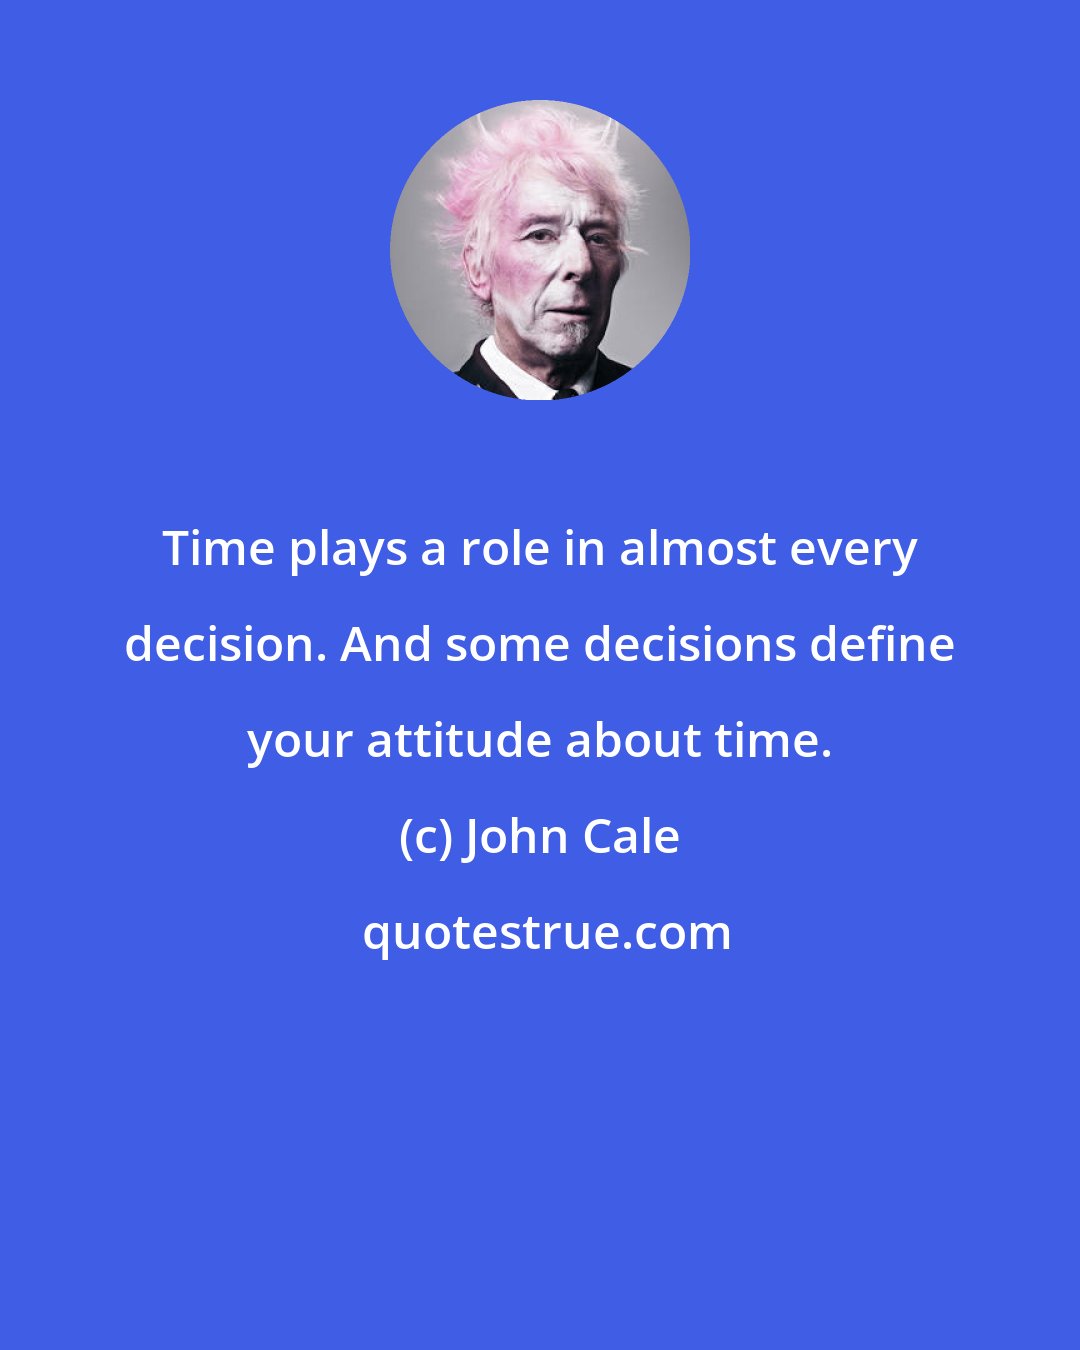 John Cale: Time plays a role in almost every decision. And some decisions define your attitude about time.